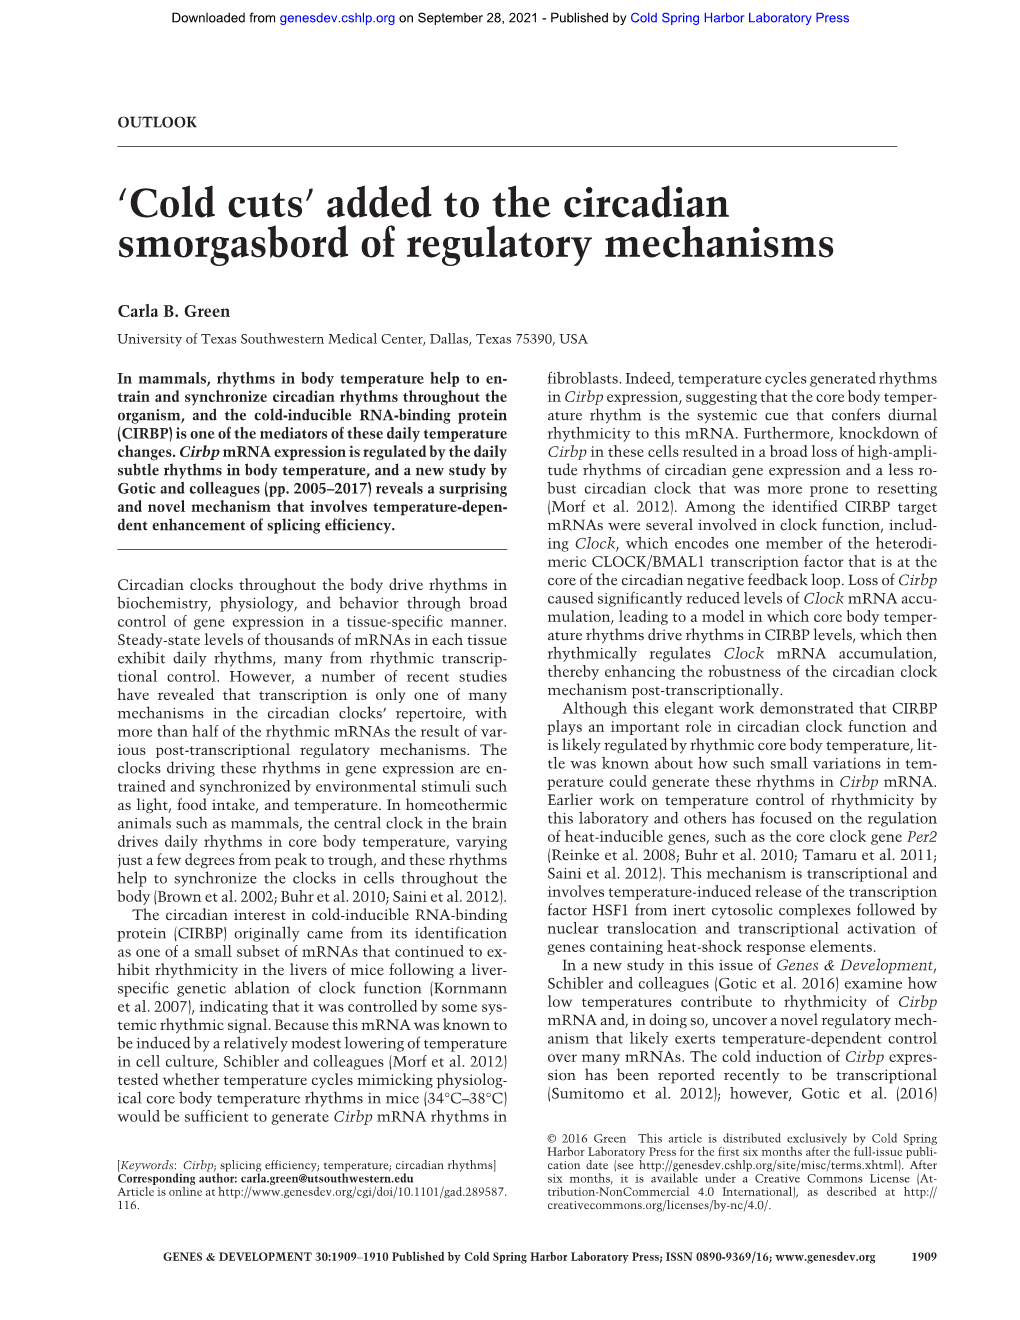 'Cold Cuts' Added to the Circadian Smorgasbord of Regulatory Mechanisms